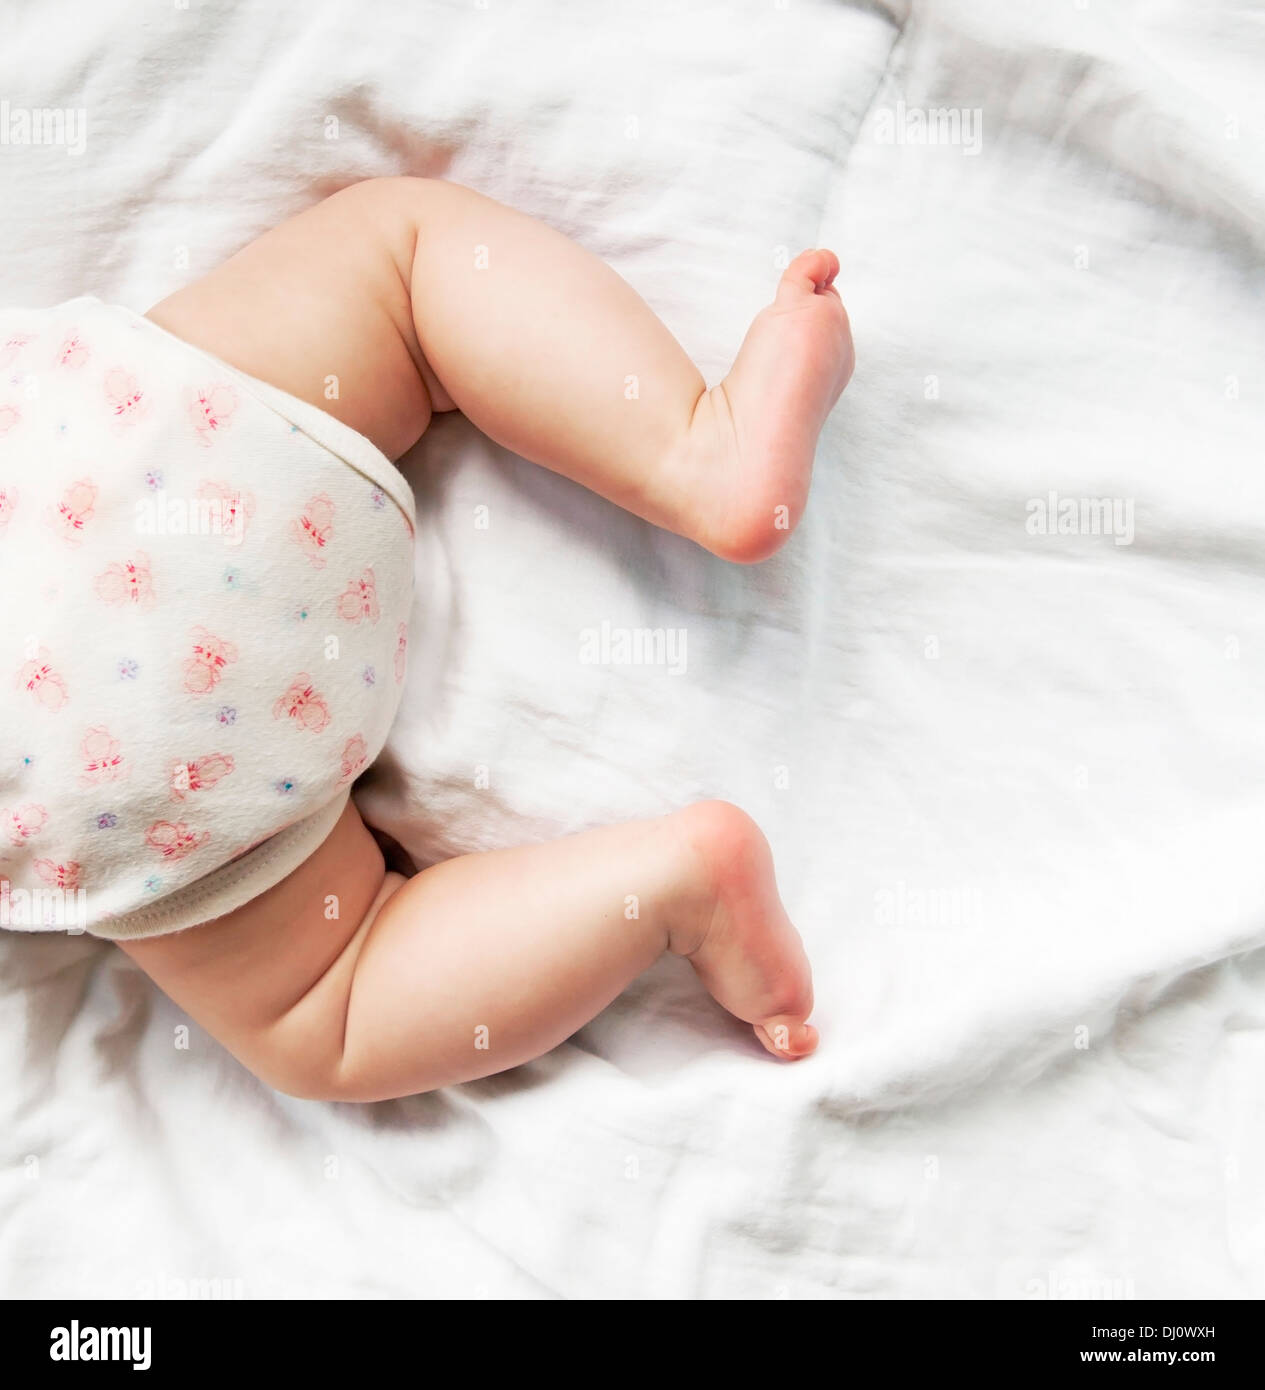 Baby's butt, legs and feet Stock Photo